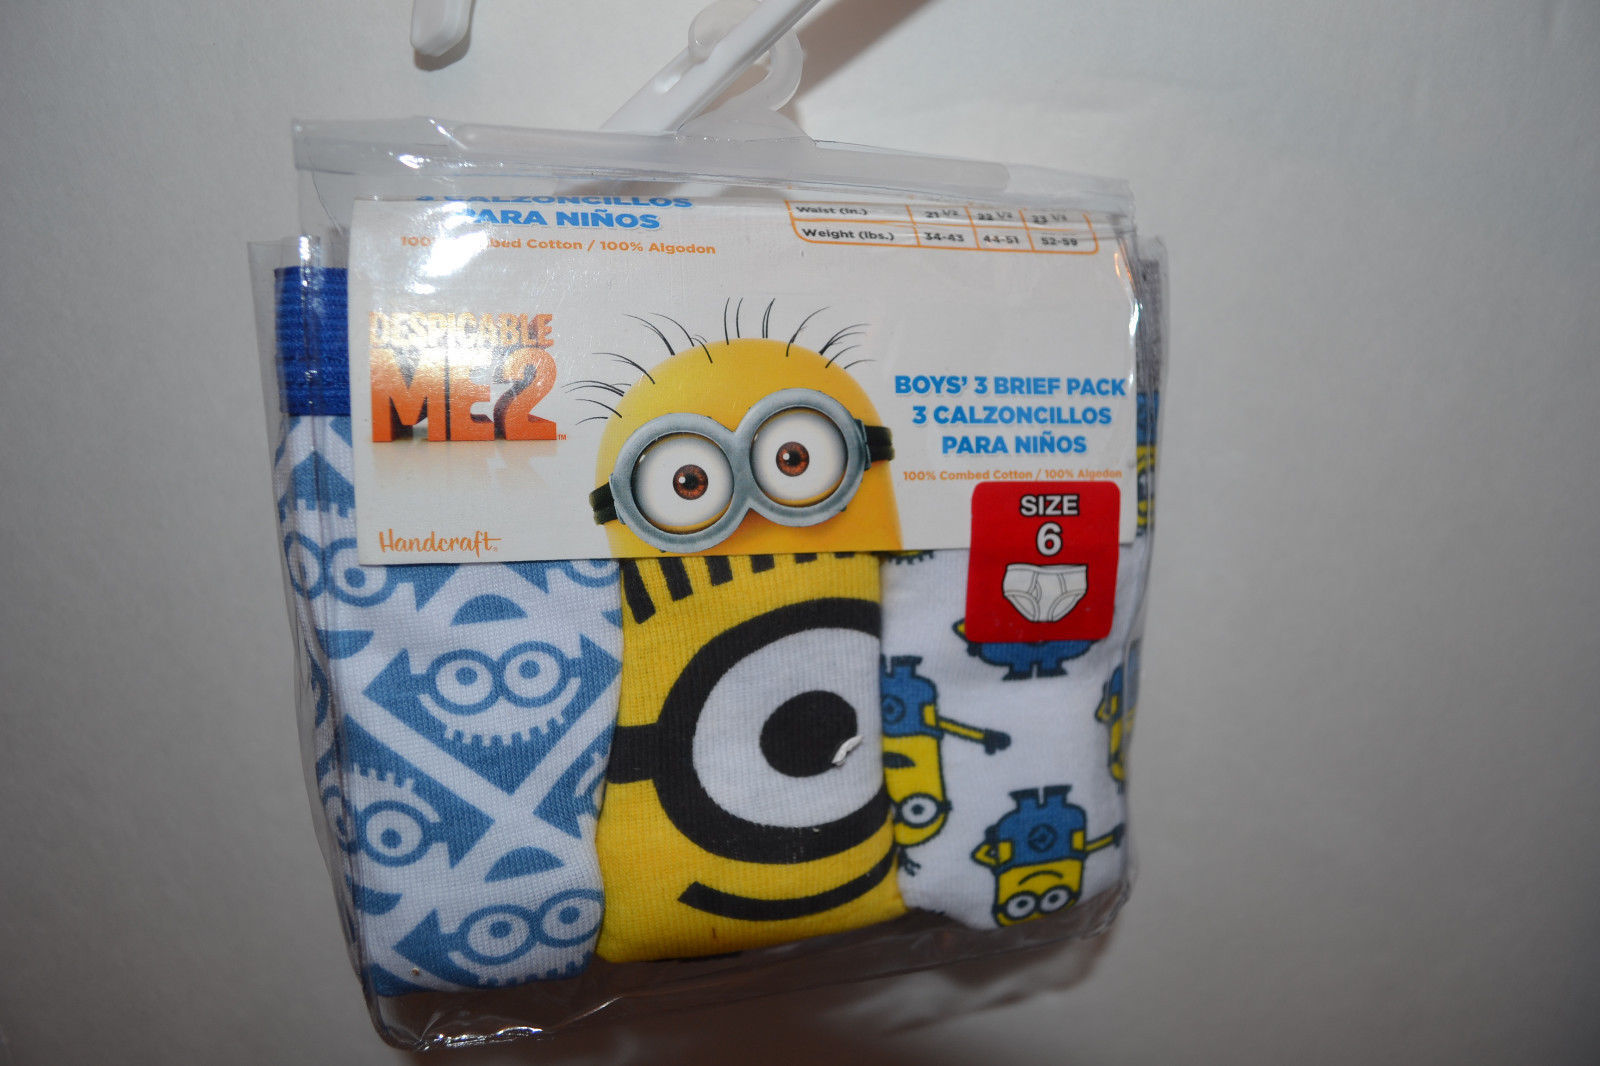 Despicable Me 2 Boys Briefs 3 Pack Sizes 6 and 10 similar items